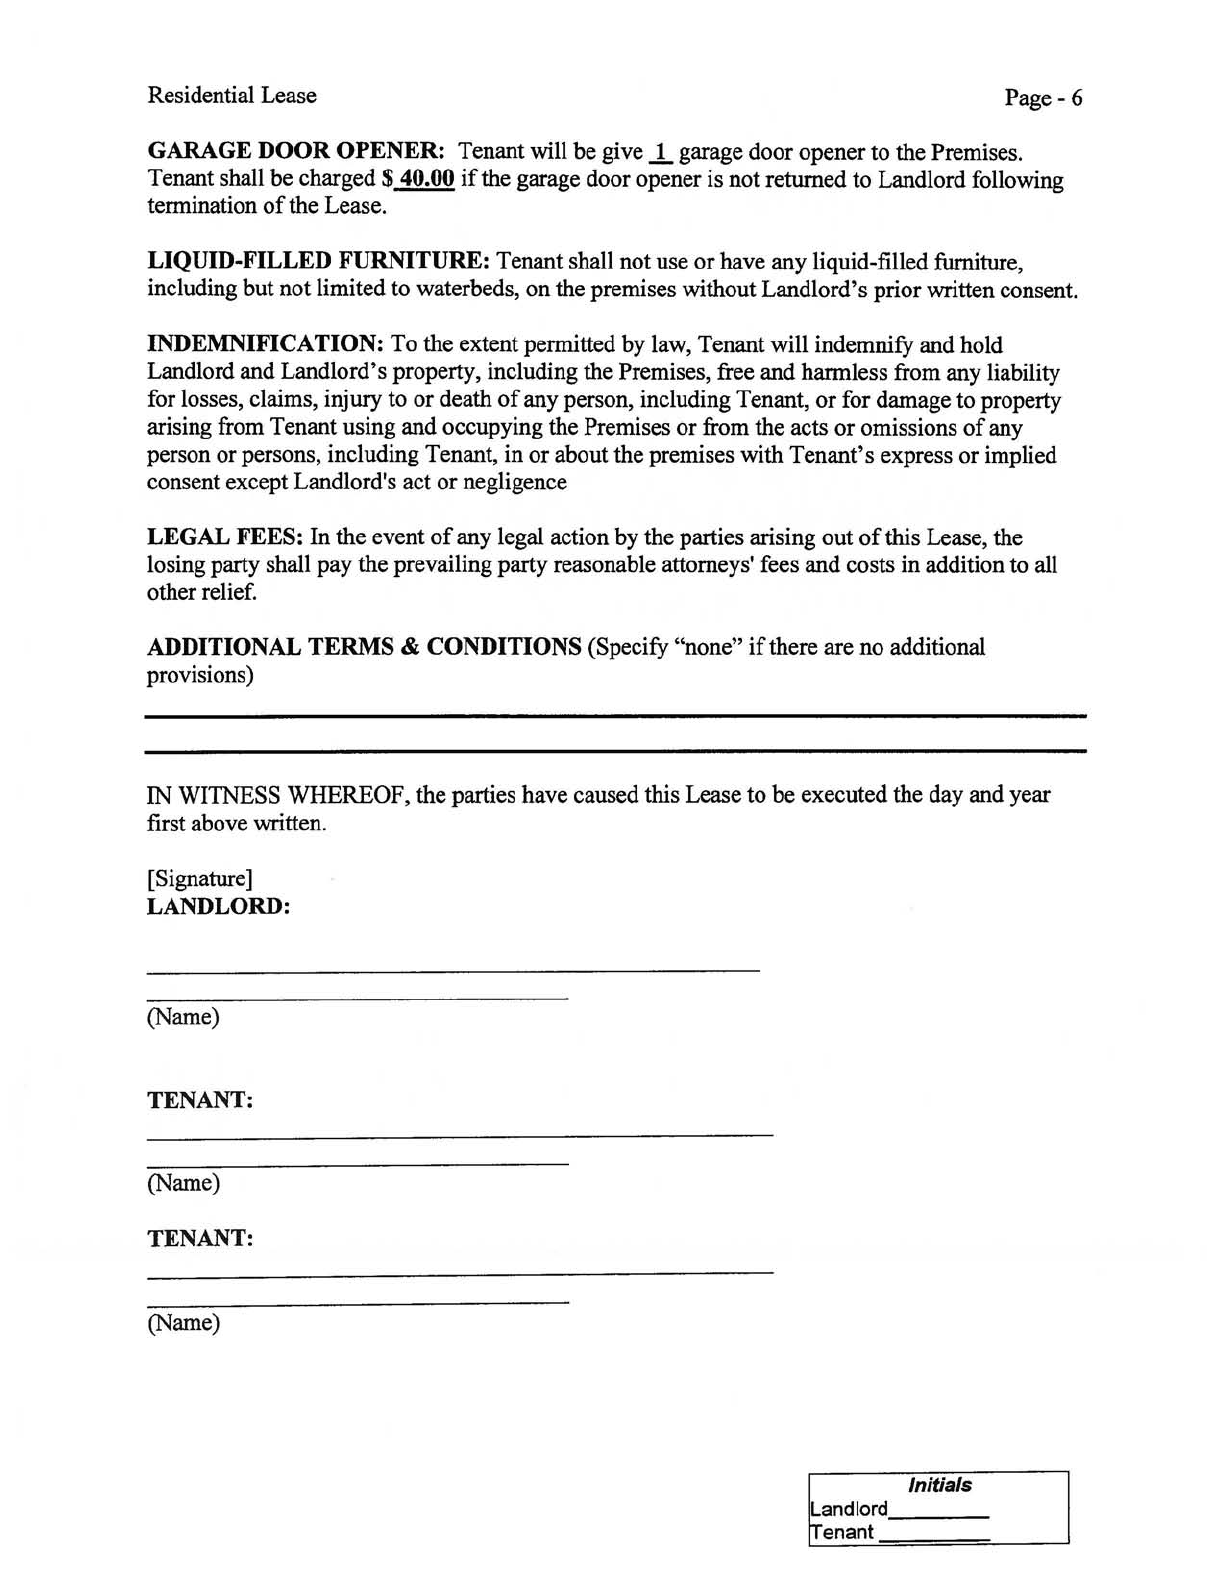 Lease Purchase Agreement 3